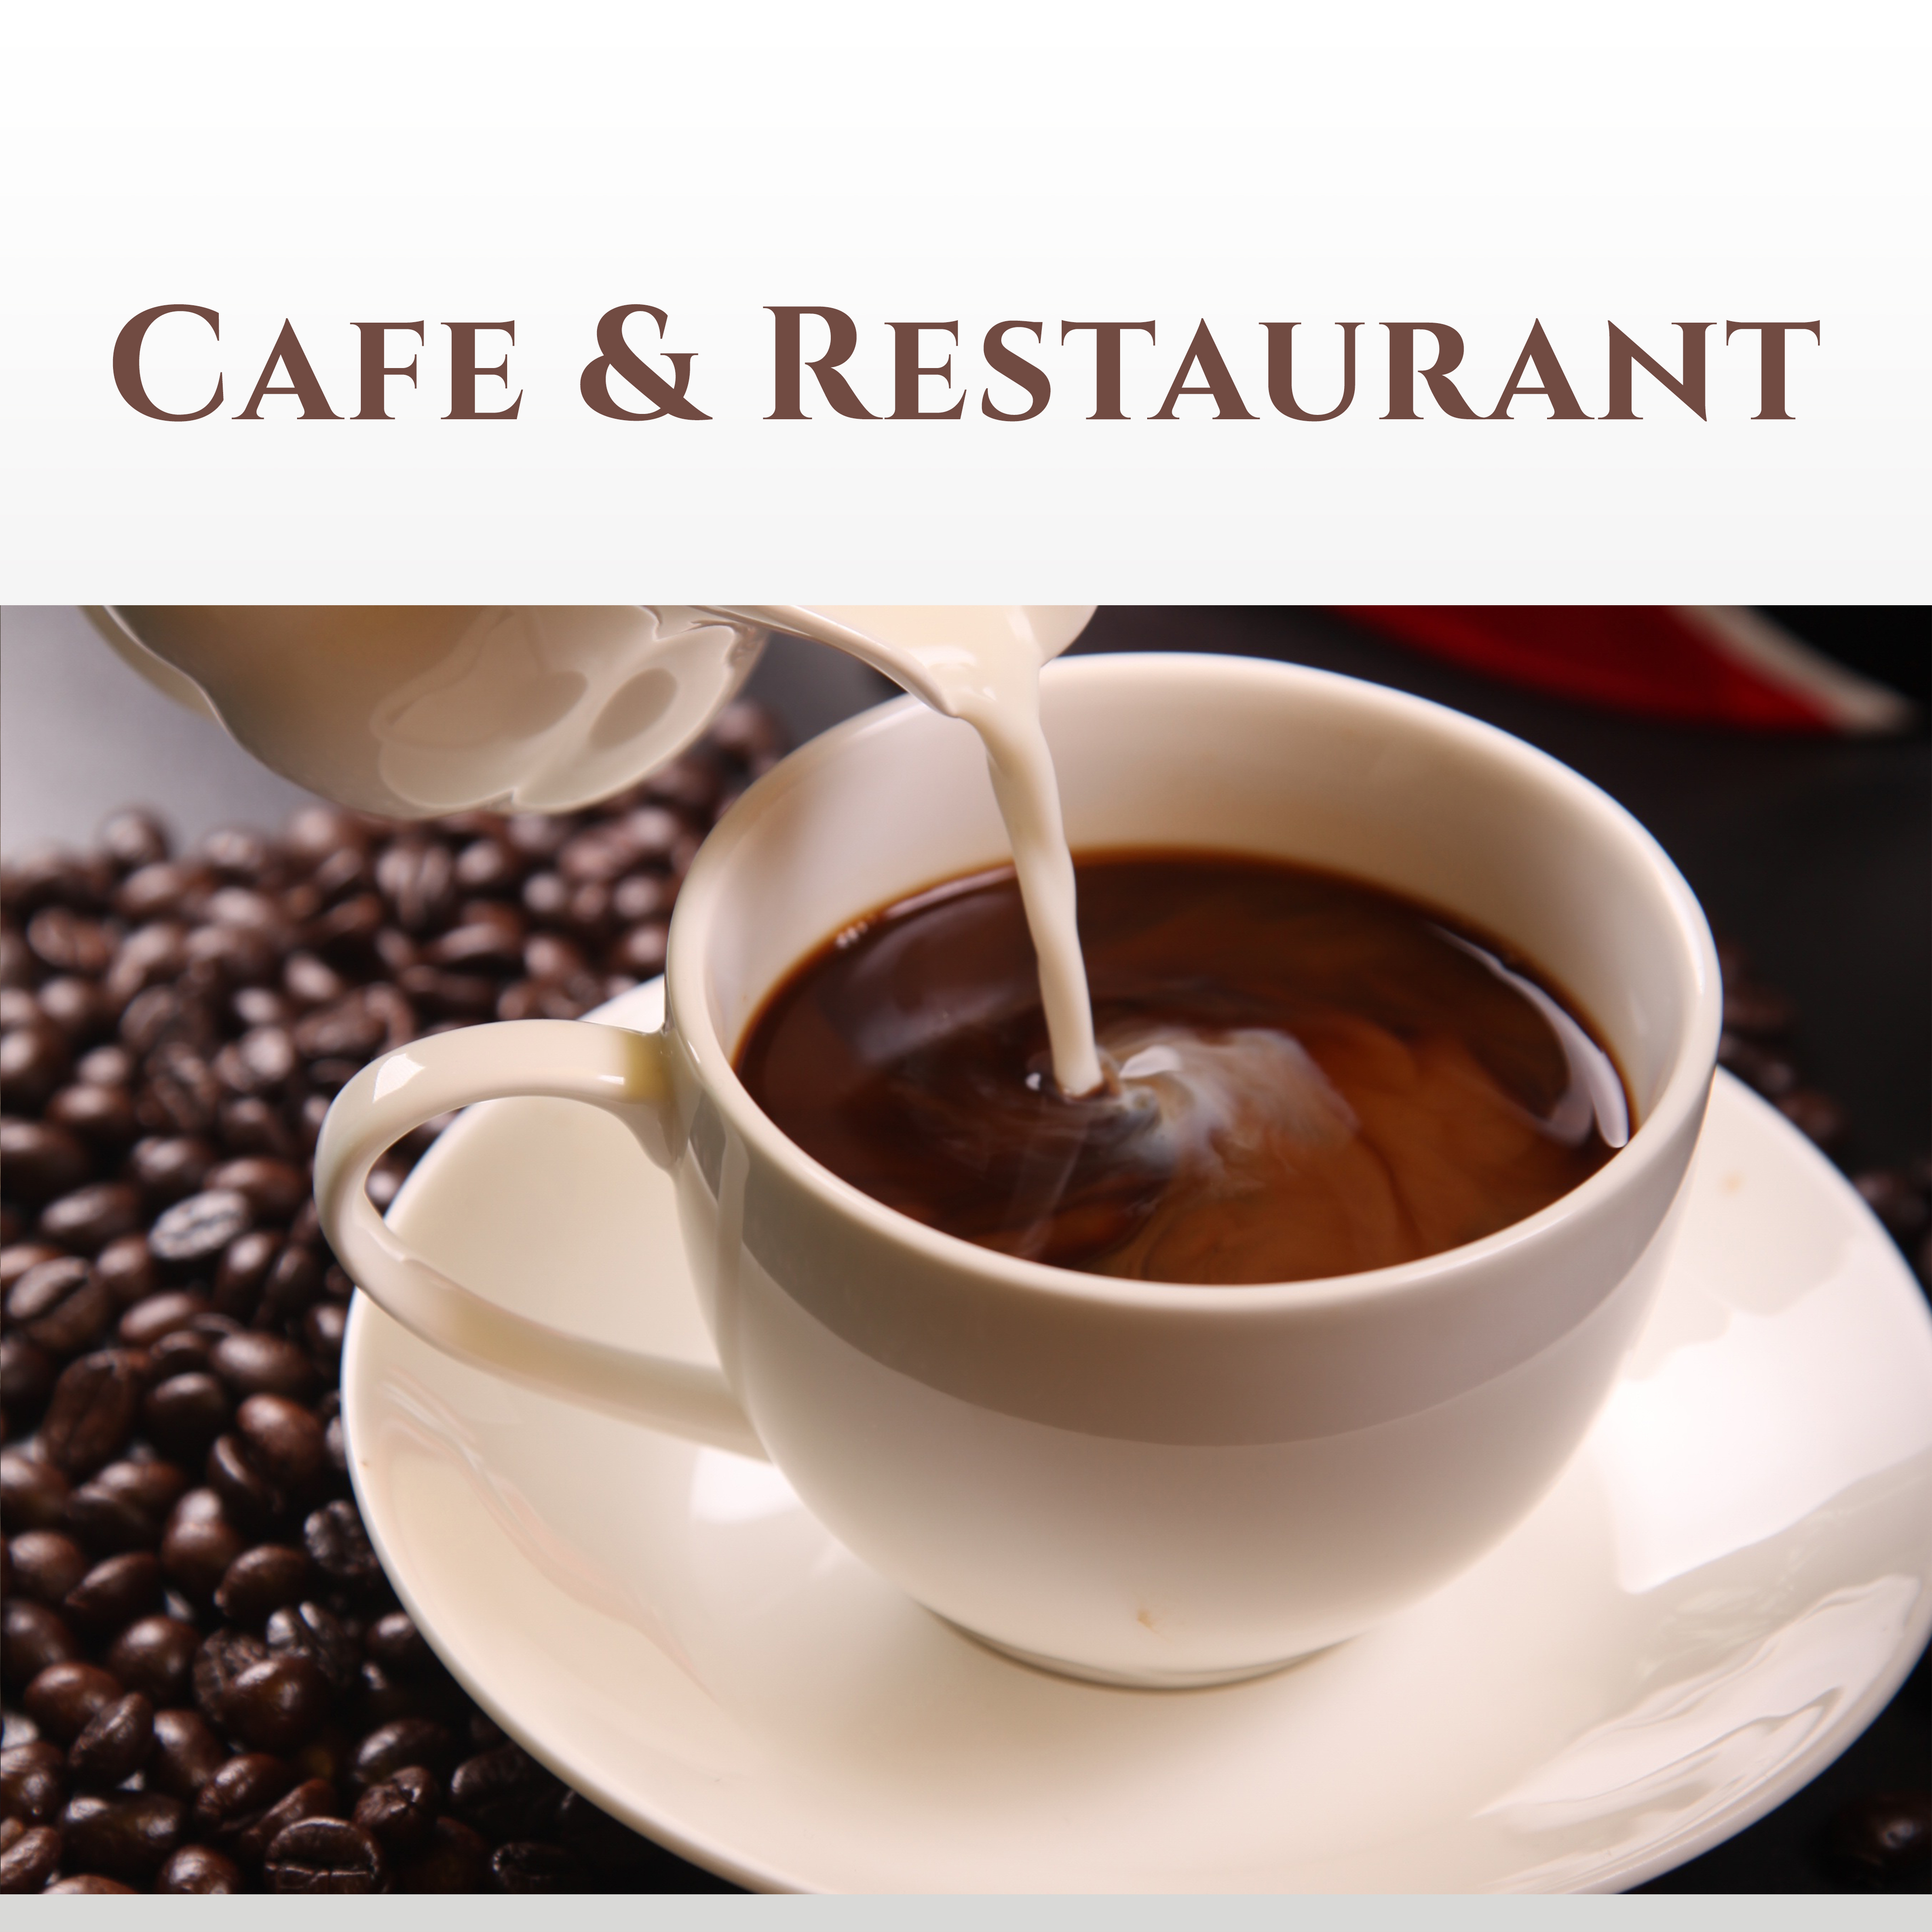 Cafe  Restaurant  Instrumental Music for Relaxation, Piano Bar, Smooth Jazz, Coffee Talk, Dinner with Family, Jazz After Work